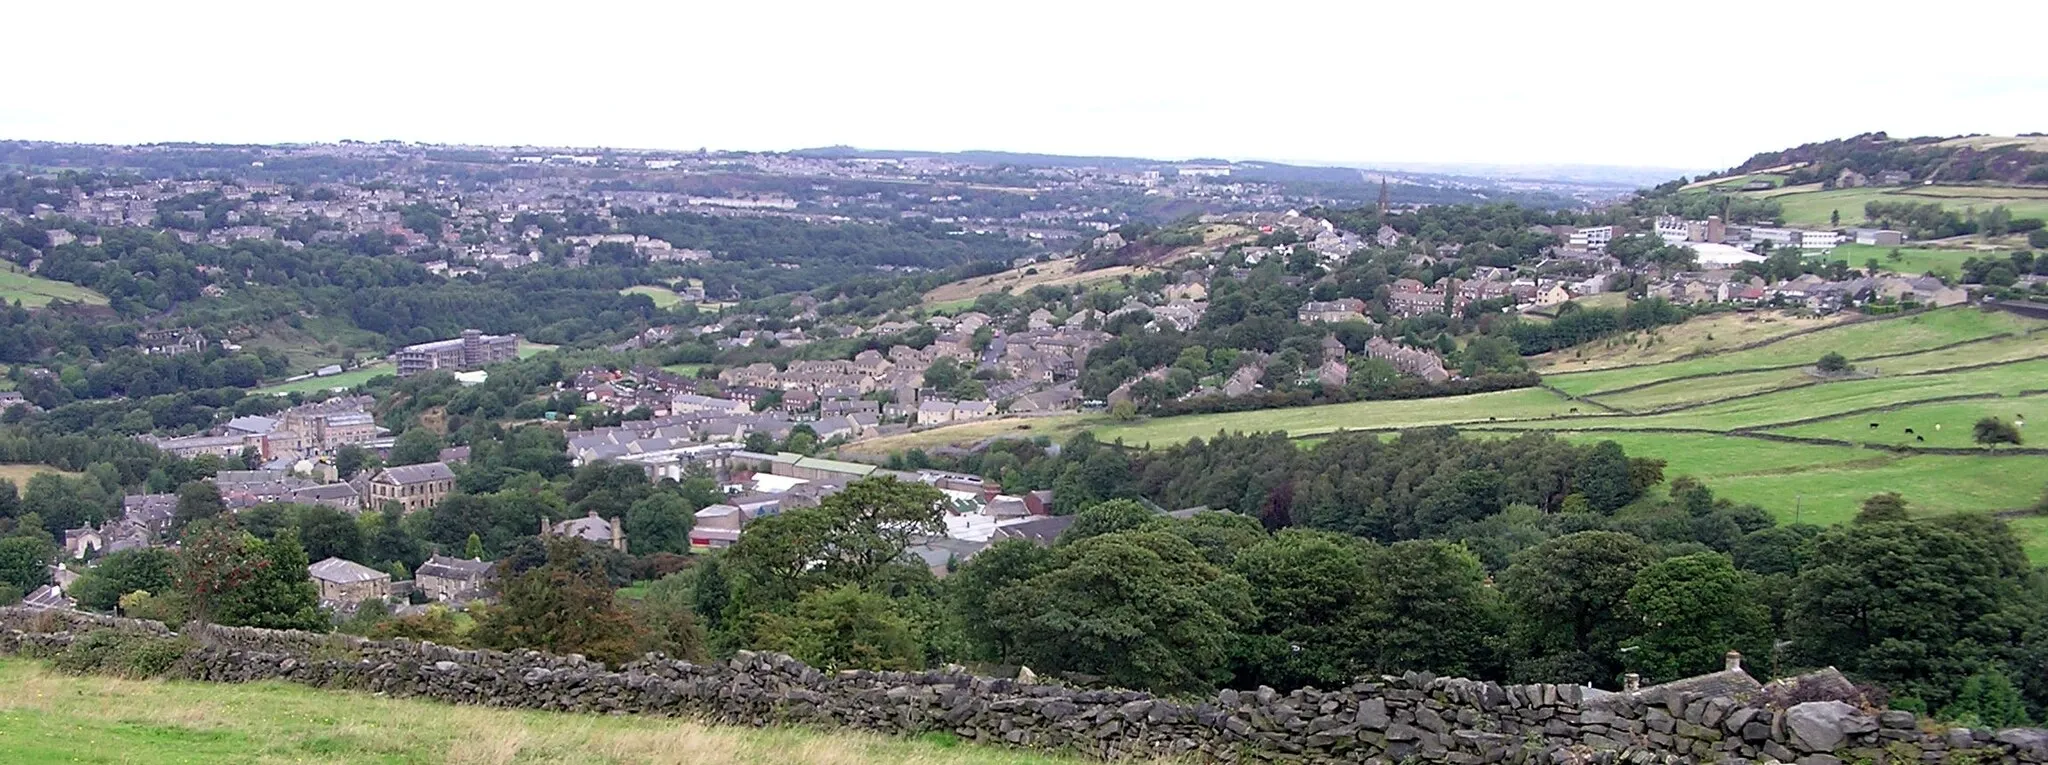 Photo showing: View North of Linthwaite and Linfit in the Colne Valley, Huddersfield England. Picture taken from 'High House Edge' adjacent to Blackmoorfoot Reservoir.